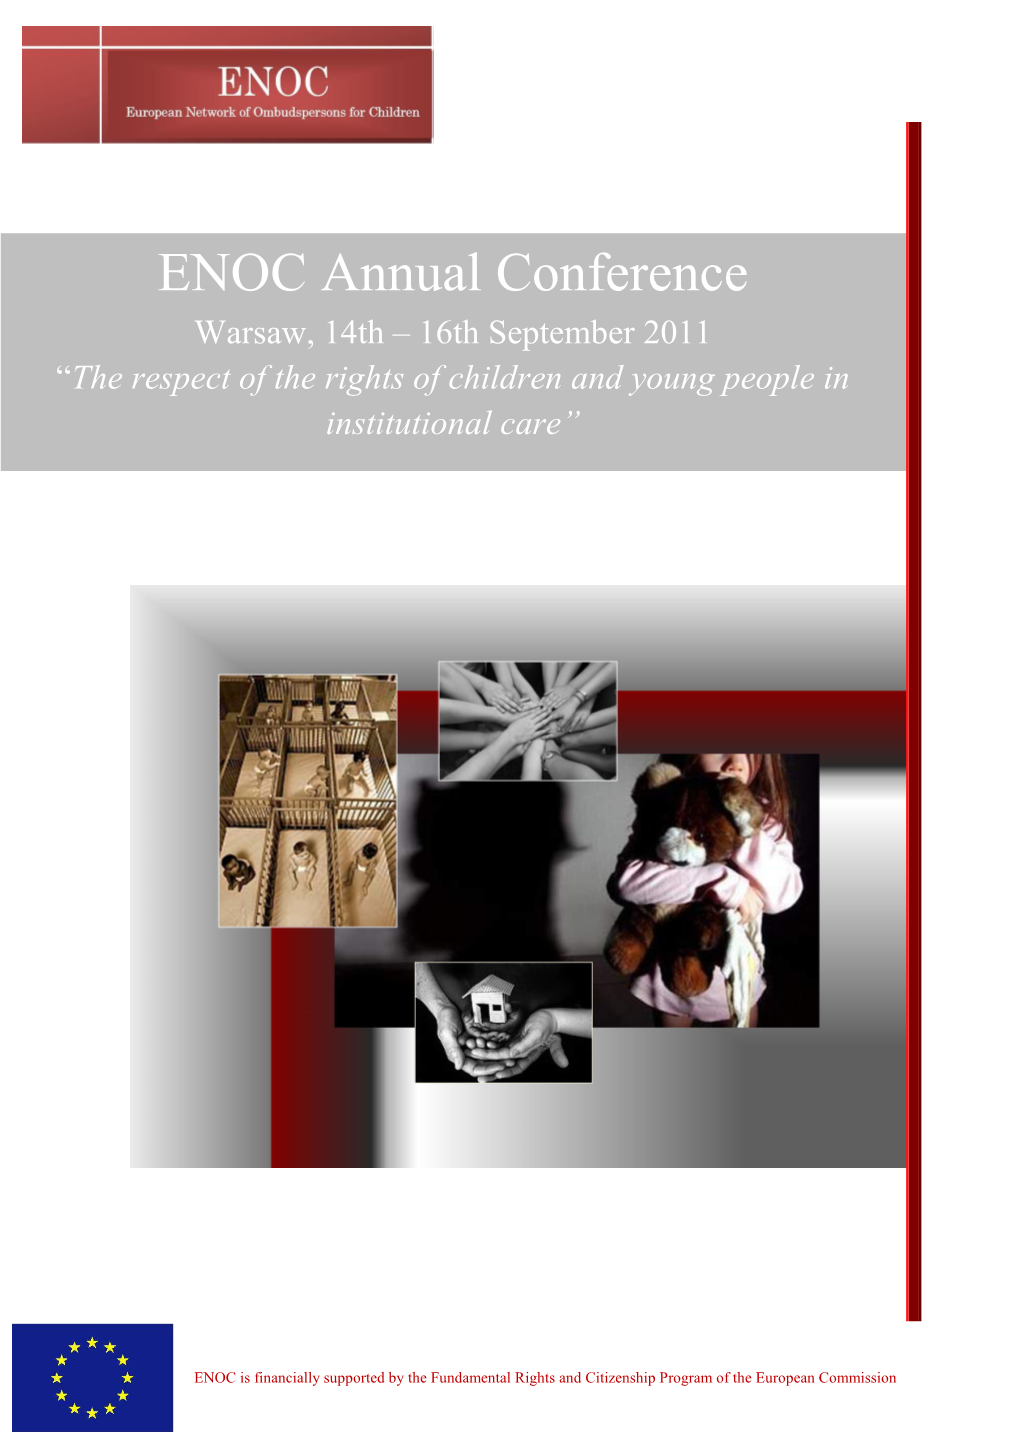 Warsaw Annual Conference Report 2011